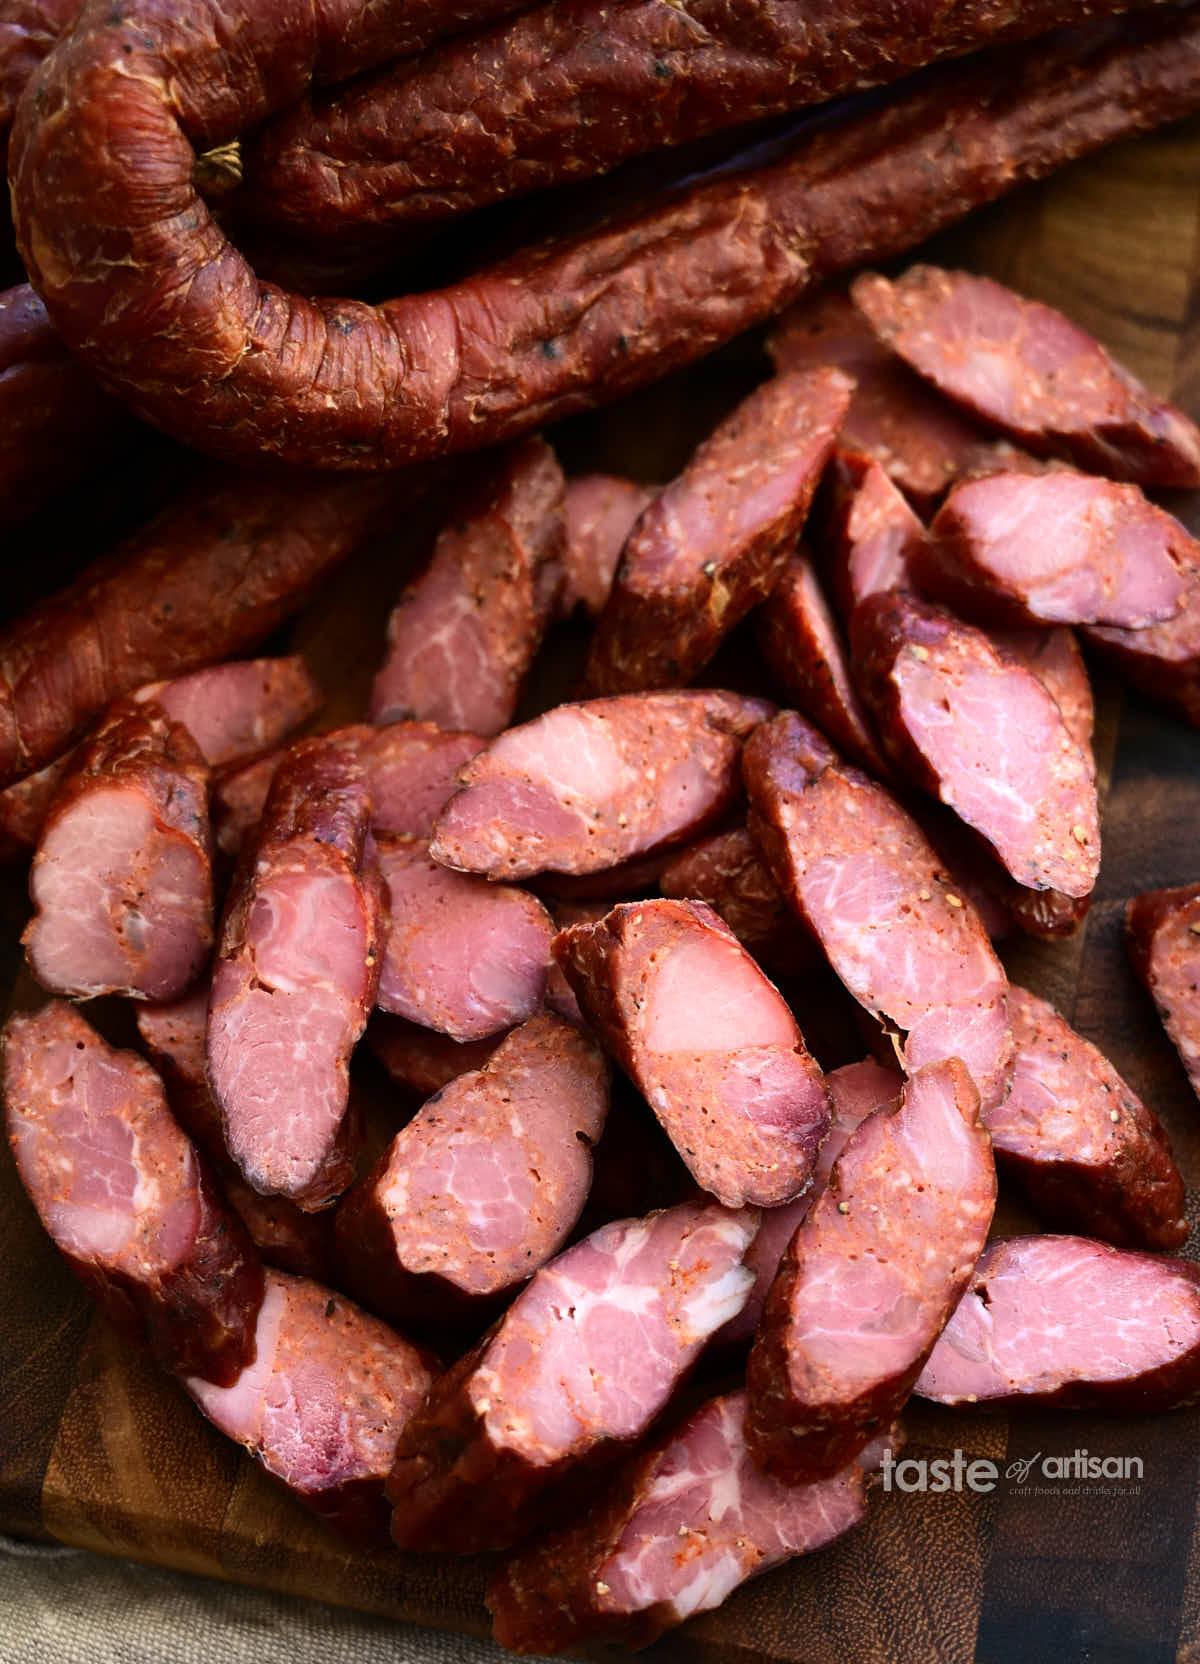 Homemade Andouille sausage amde with a combination of ground pork and chunks of meat, and flavored with just salt, pepper, cayenne and garlic.